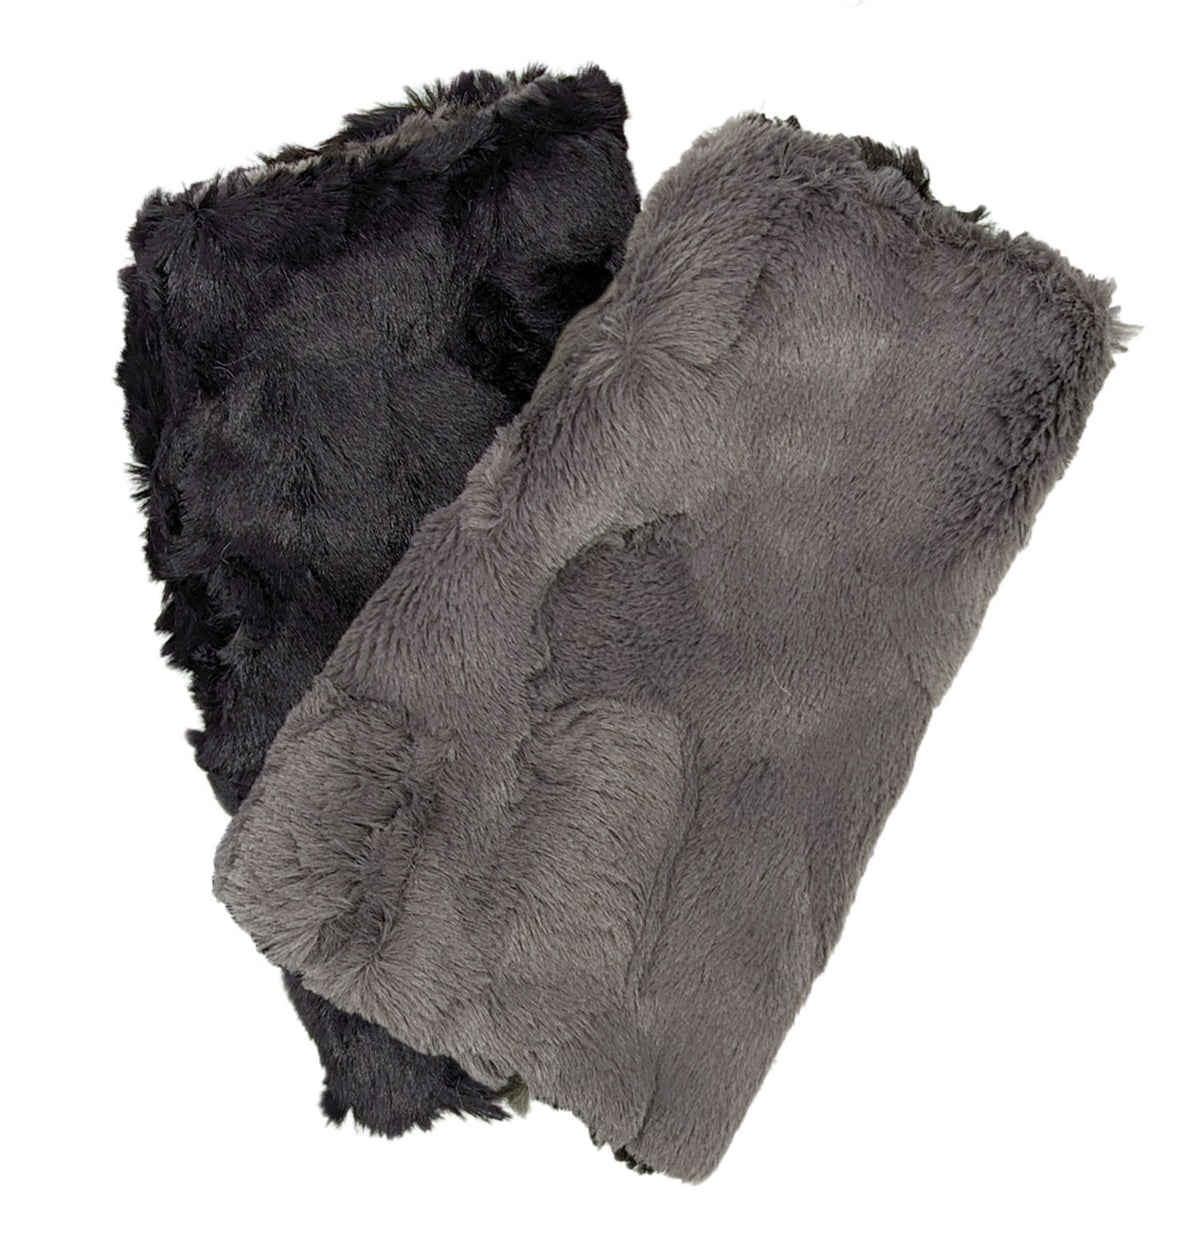 Fingerless Texting Gloves | Cuddly Gray Lined with Black Faux Fur | Pandemonium Millinery